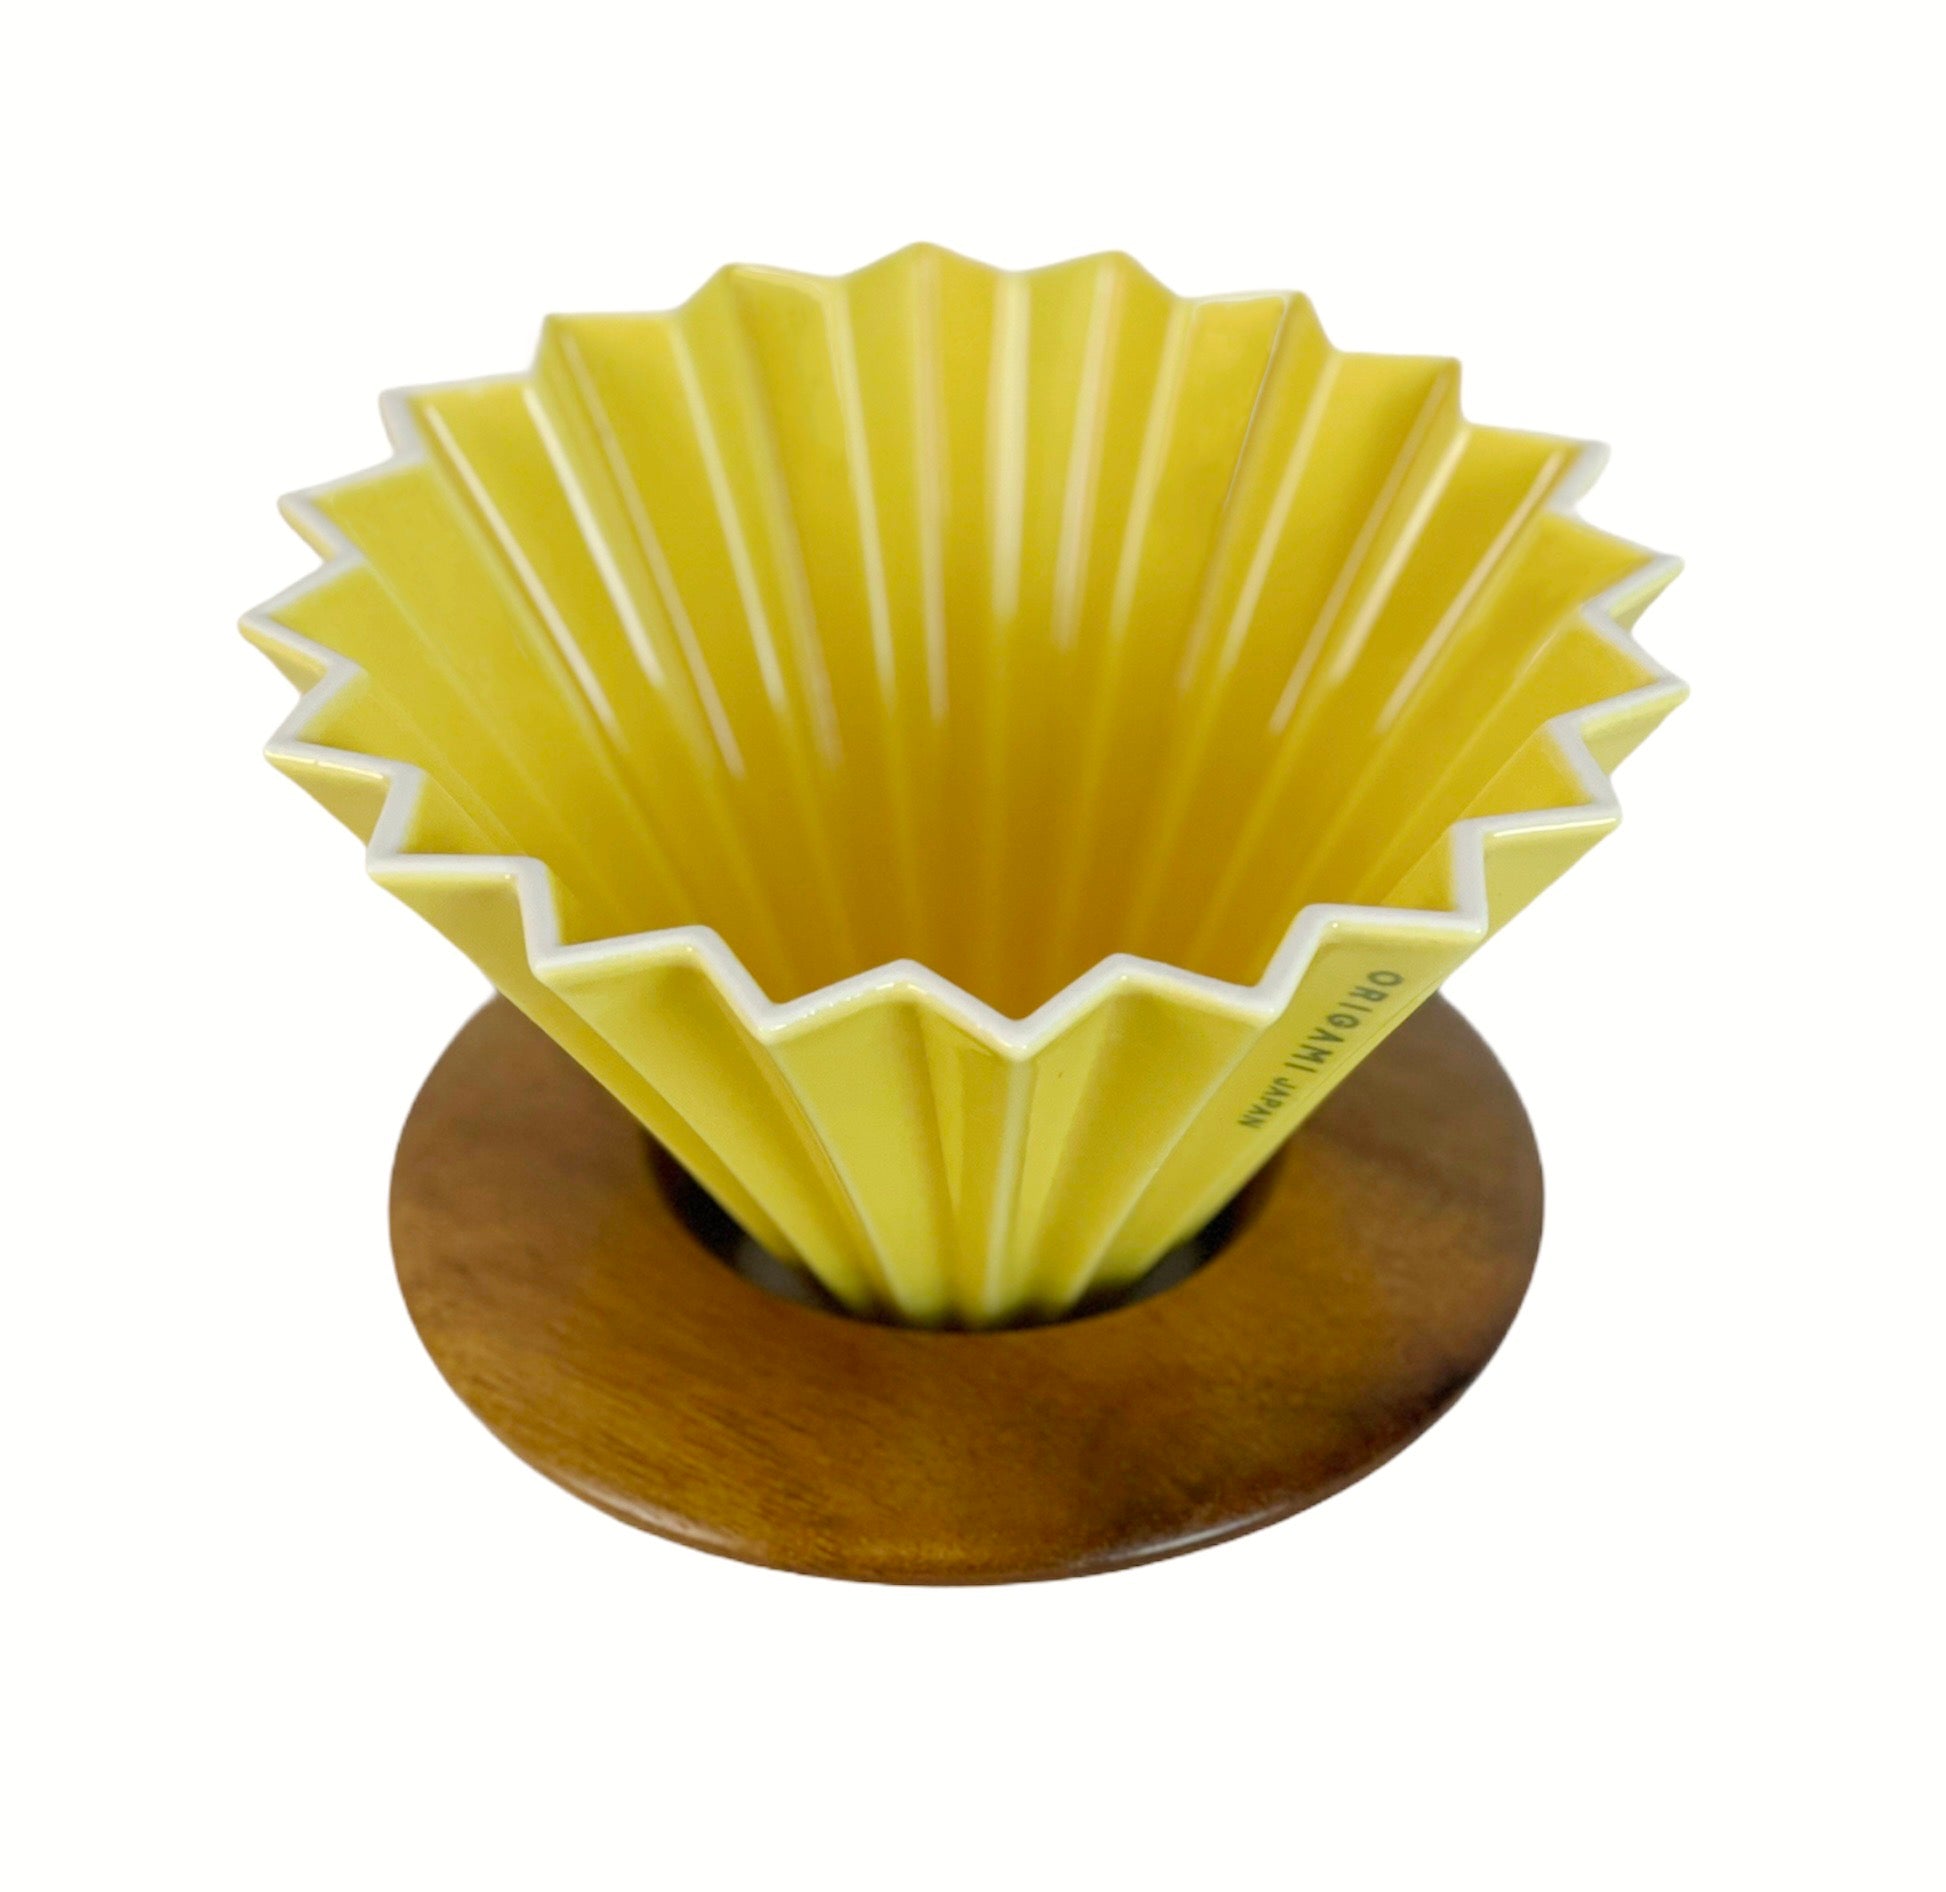 YELLOW ORIGAMI COFFEE DRIPPER WITH WOOD ORIGAMI DRIPPER HOLDER, MADE IN JAPAN